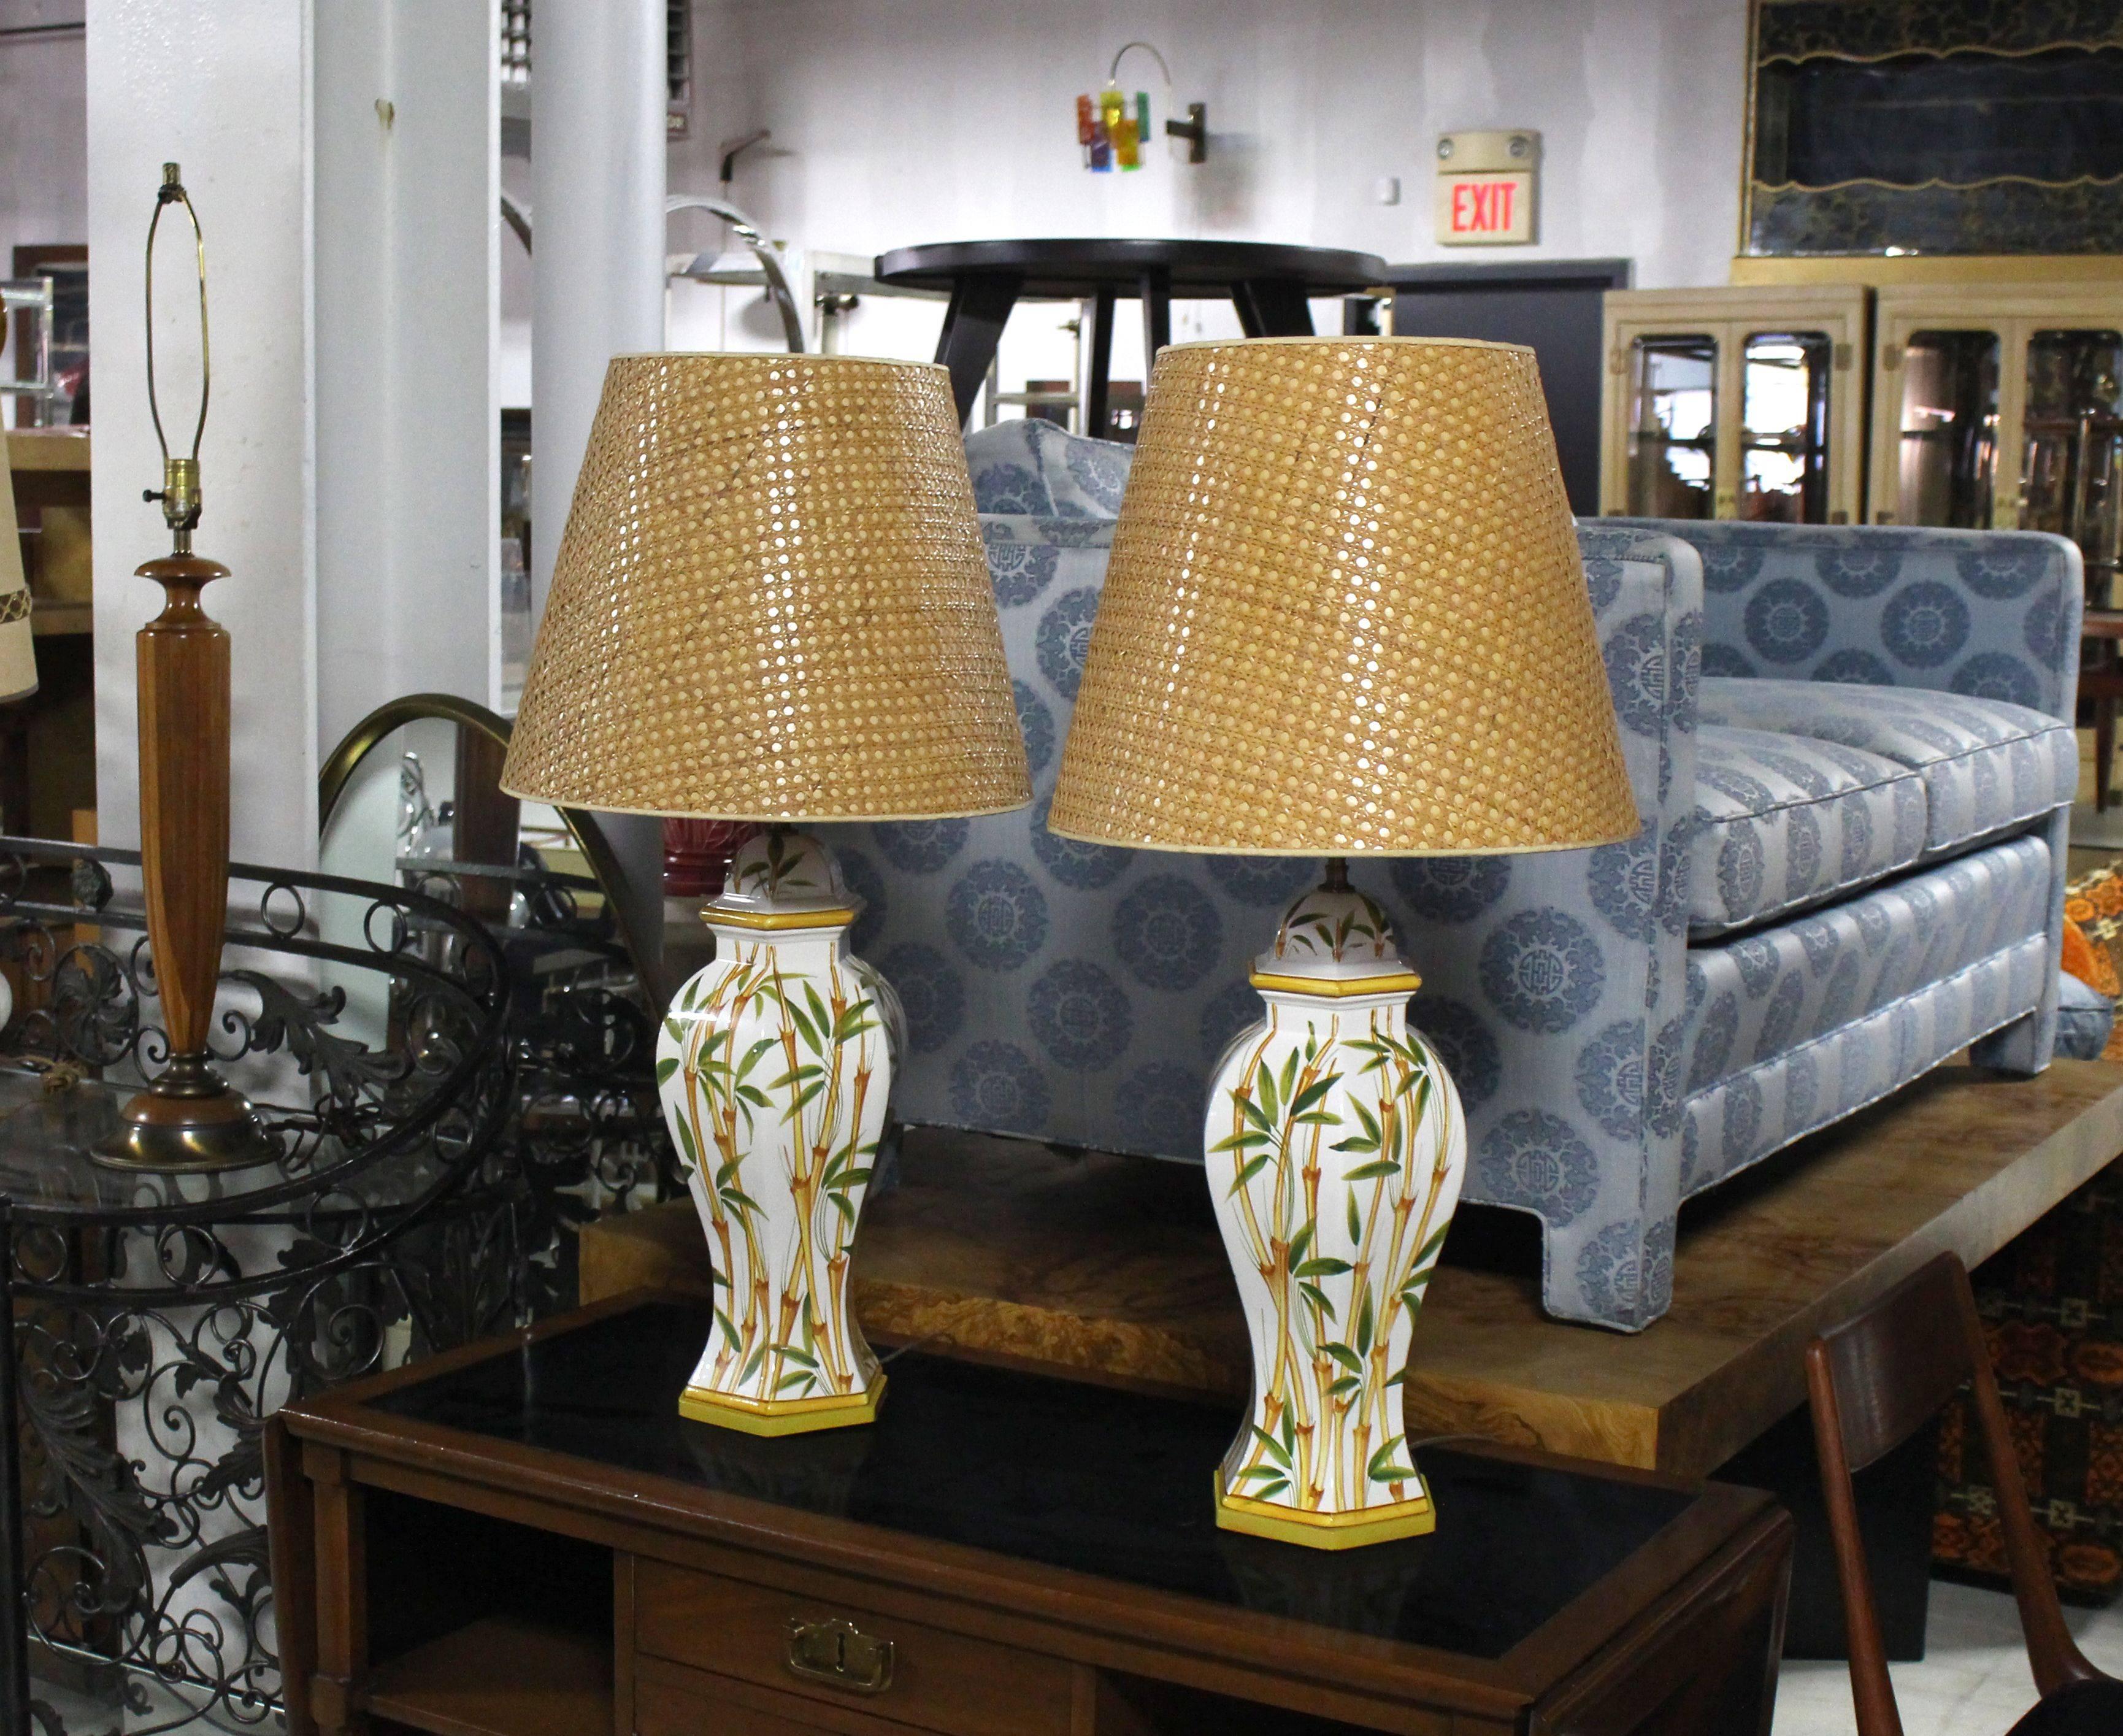 Very nicely decorated pair of pottery ceramic Mid-Century Modern lamps.